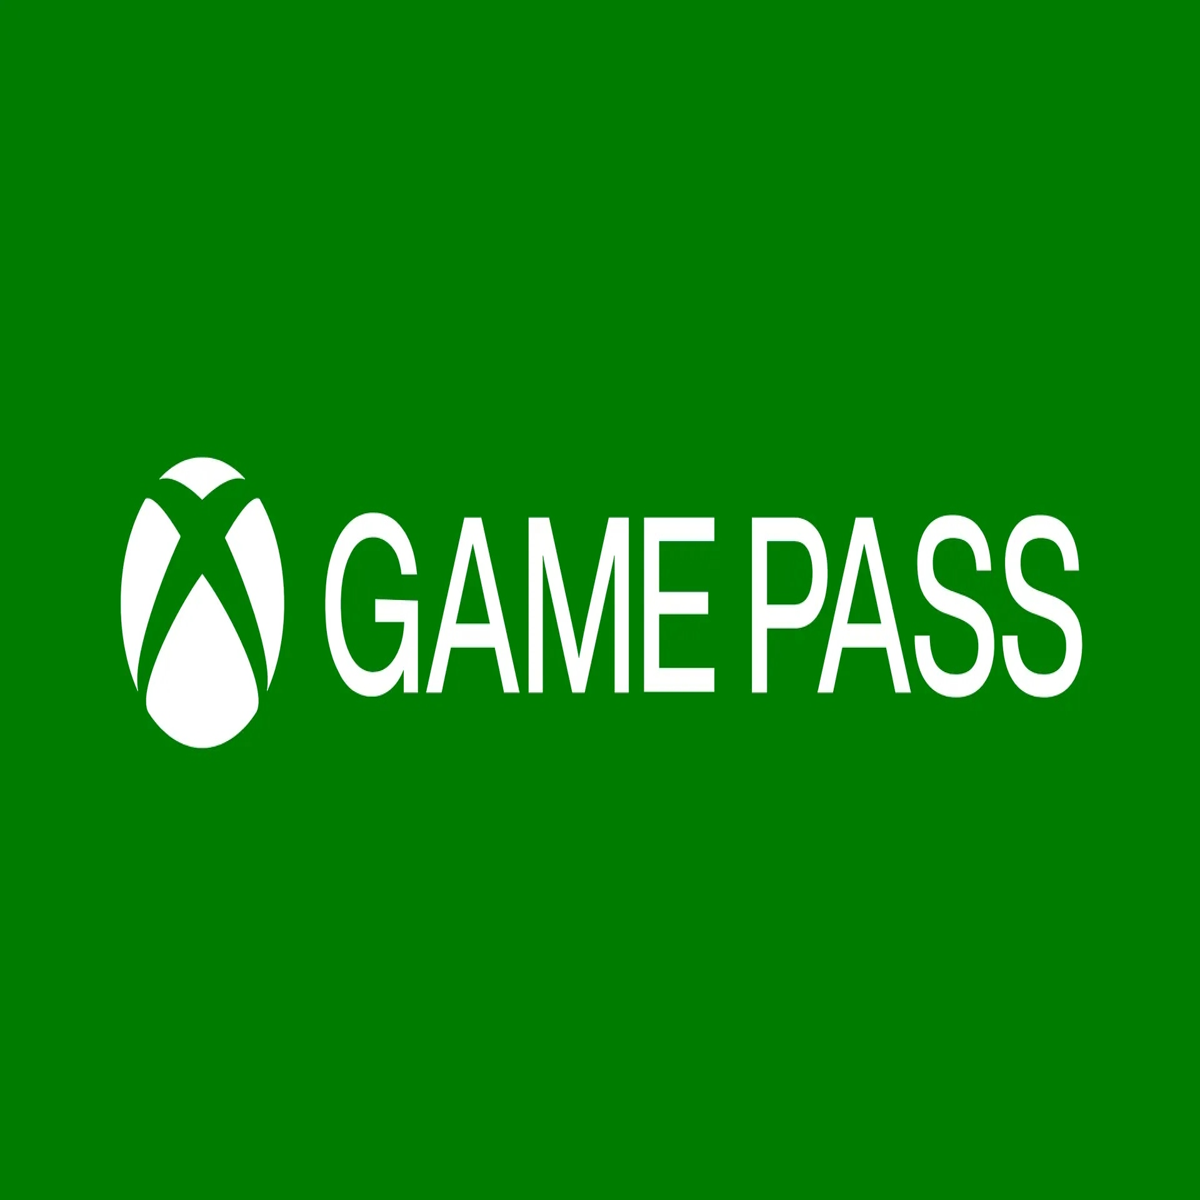 Xbox Game Pass' $1 trial returns following recent price increase